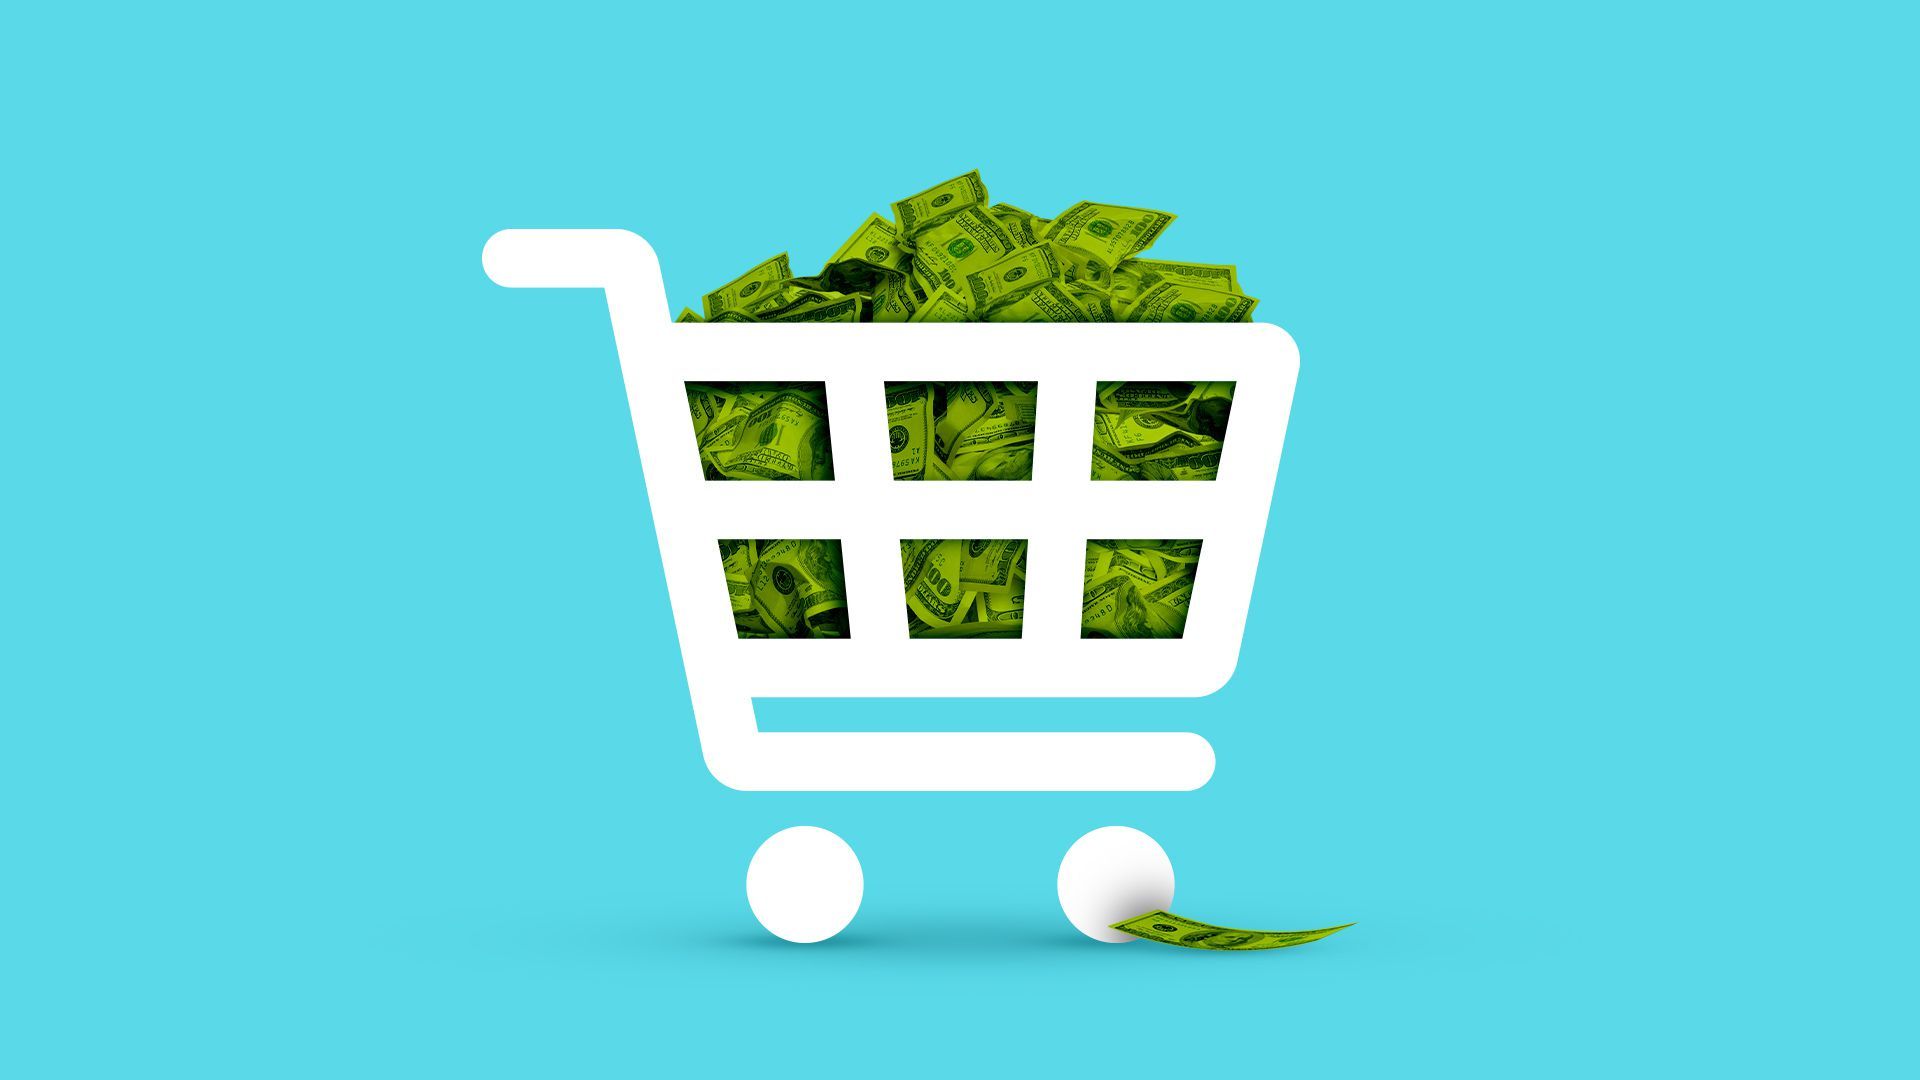 Illustration of a shopping cart icon full of money. 